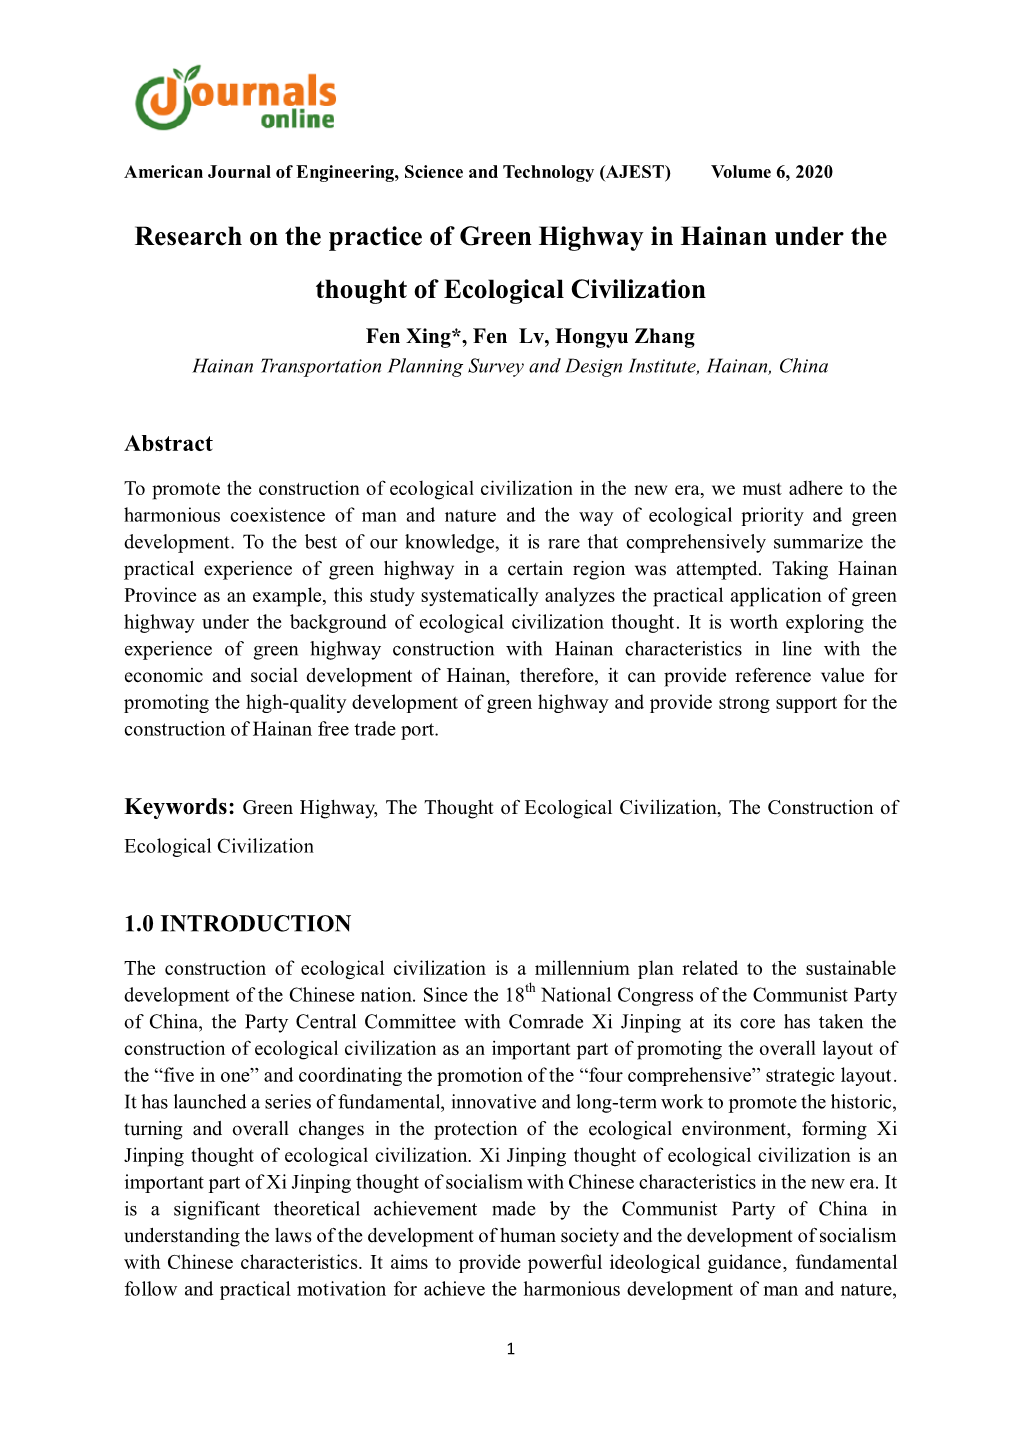 Research on the Practice of Green Highway in Hainan Under the Thought of Ecological Civilization